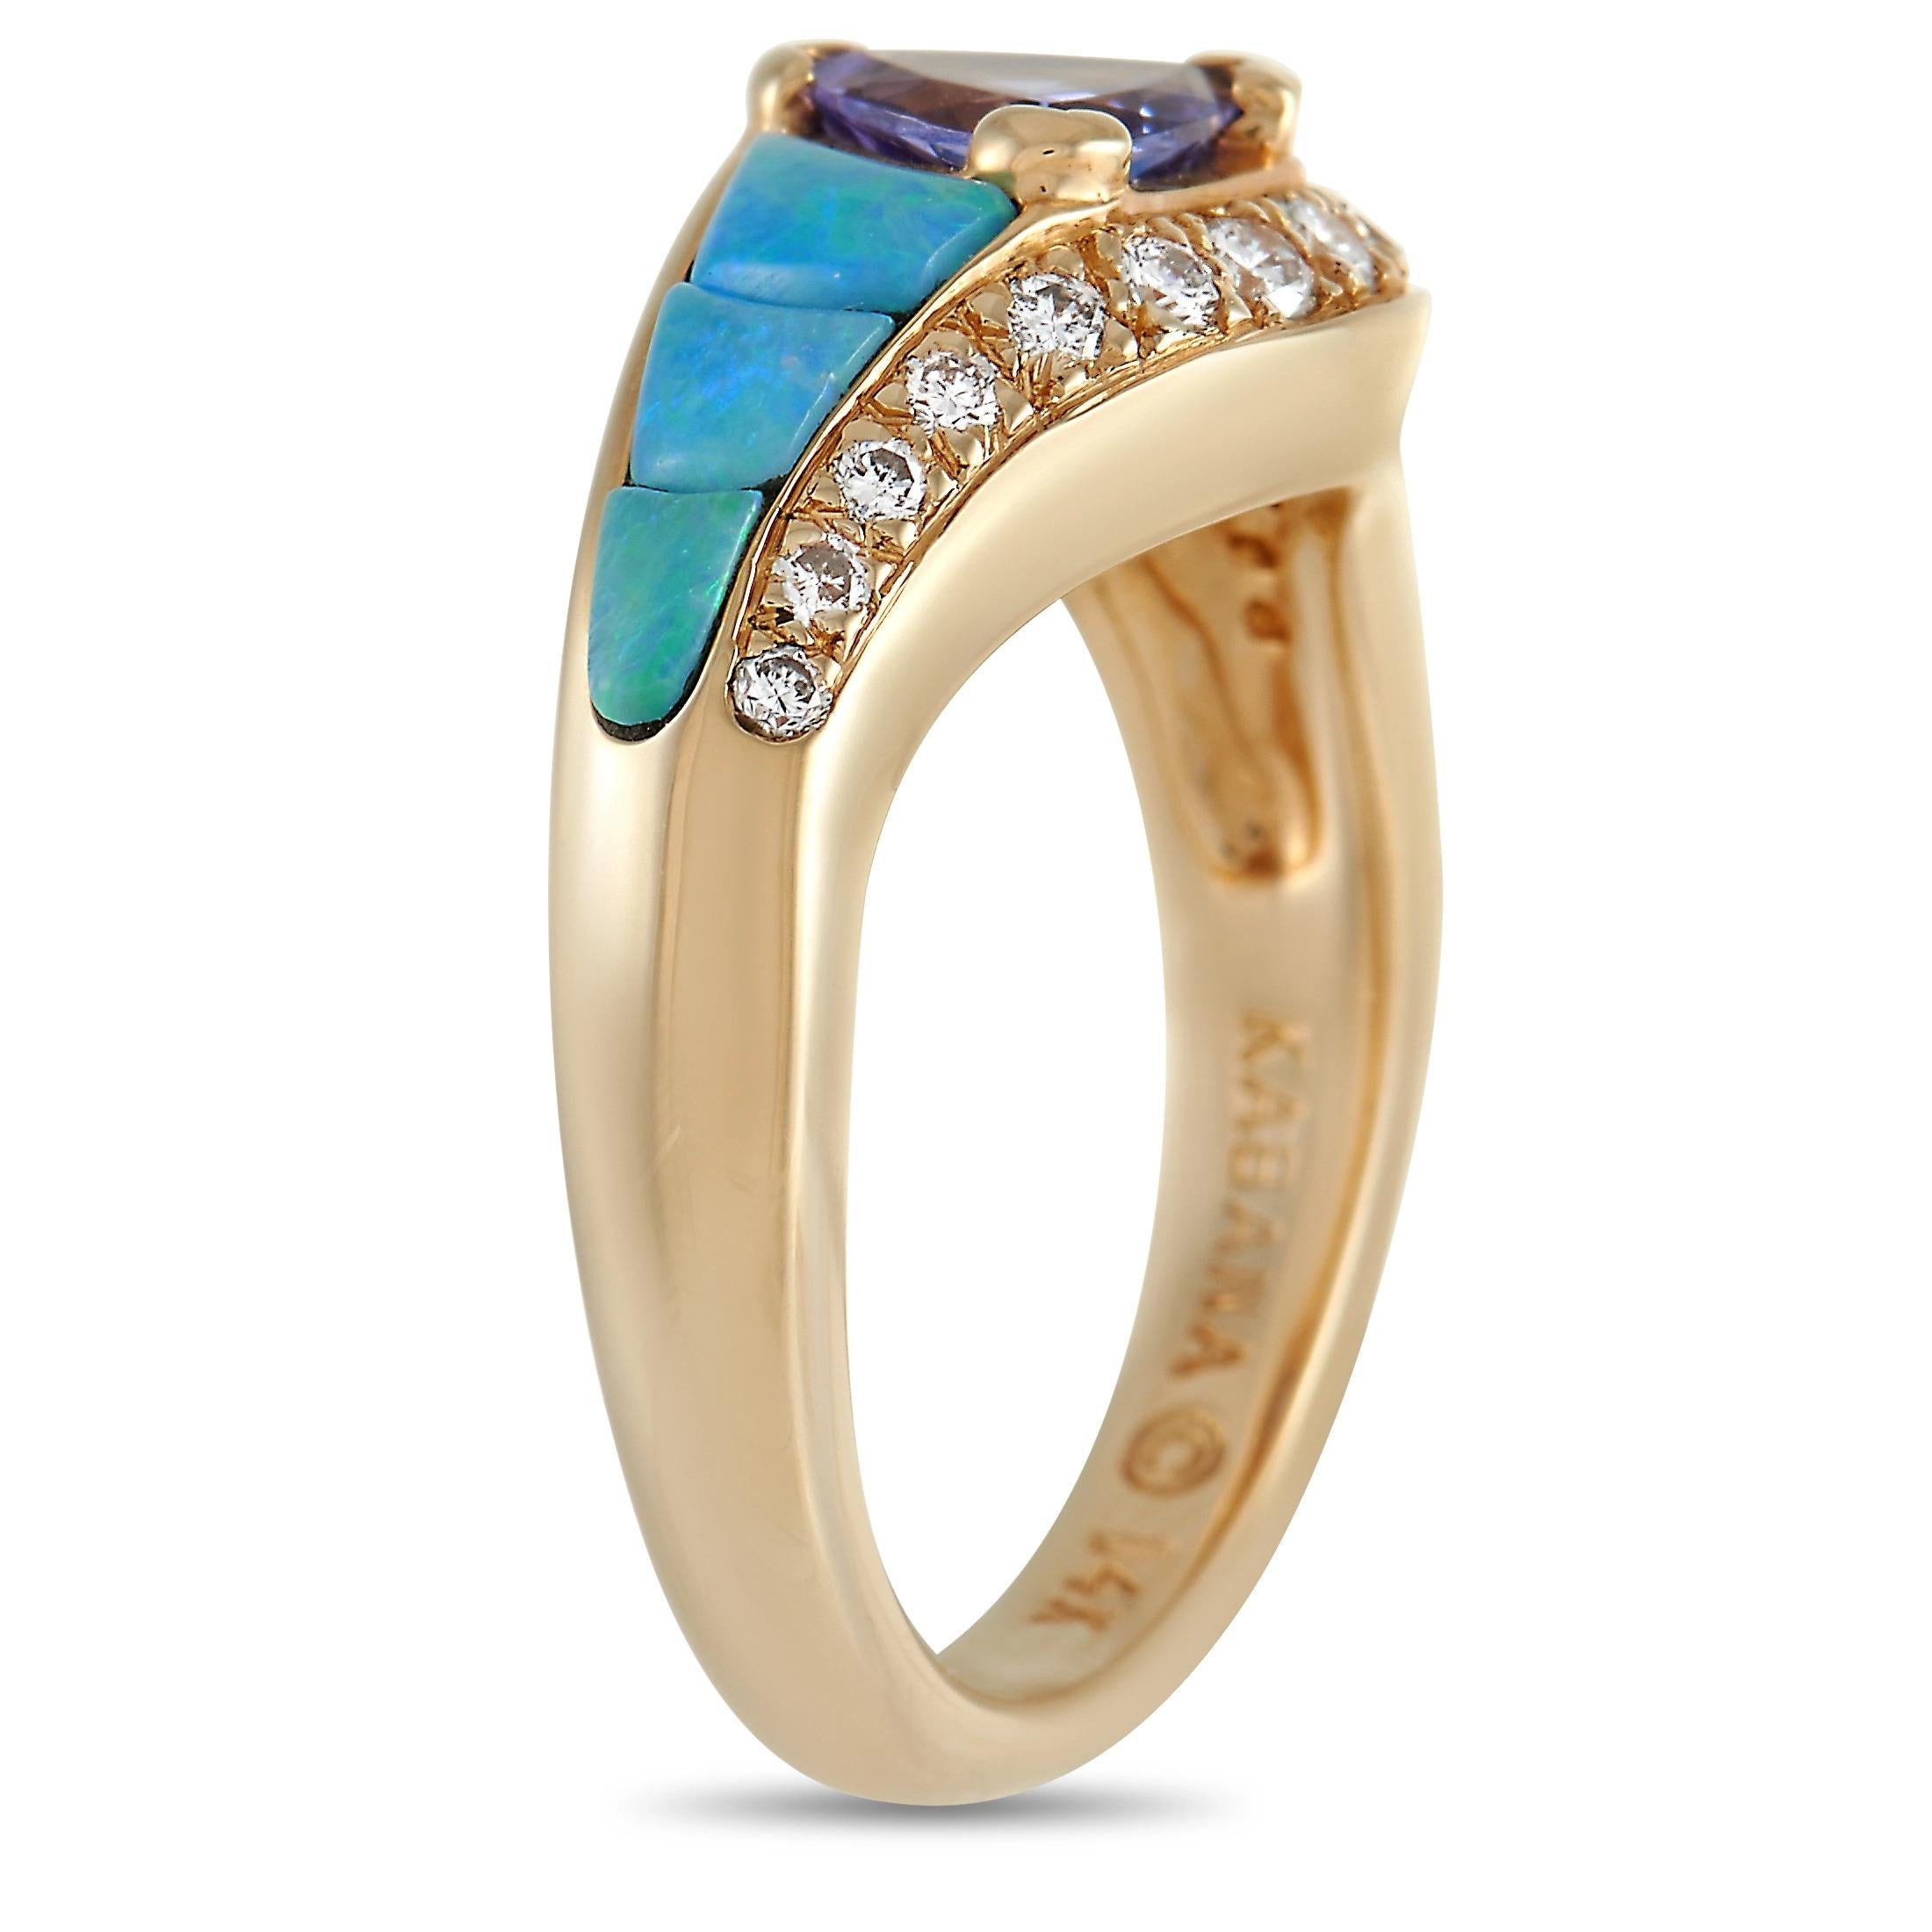 This elegant Kabana ring is truly stunning to behold. A 0.80 carat Tanzanite center stone is only elevated by the presence of blue-toned inlaid opal and a scintillating series of diamonds totaling 0.20 carats. This piece’s 14K Yellow Gold setting